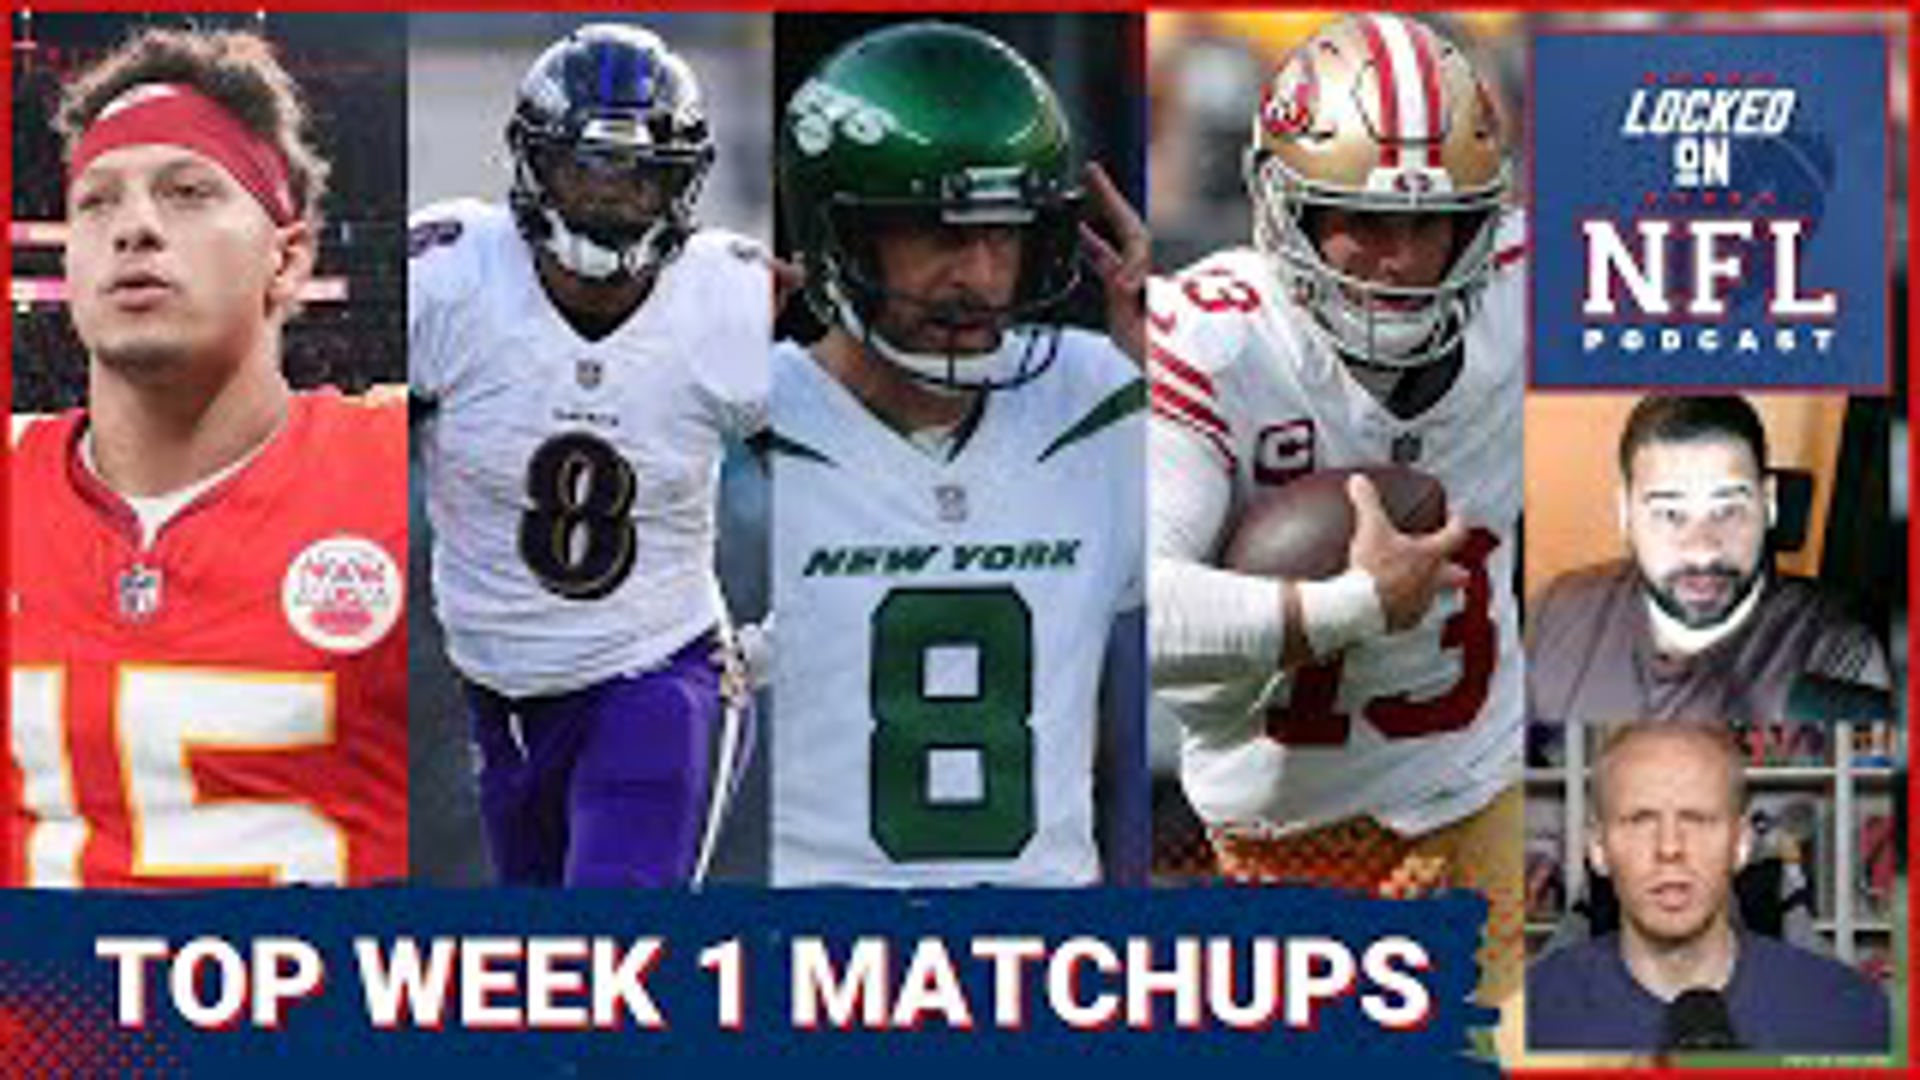 The NFL schedule is set to release Wednesday night, and we already know some of the week 1 matchups. But which ones are the best?